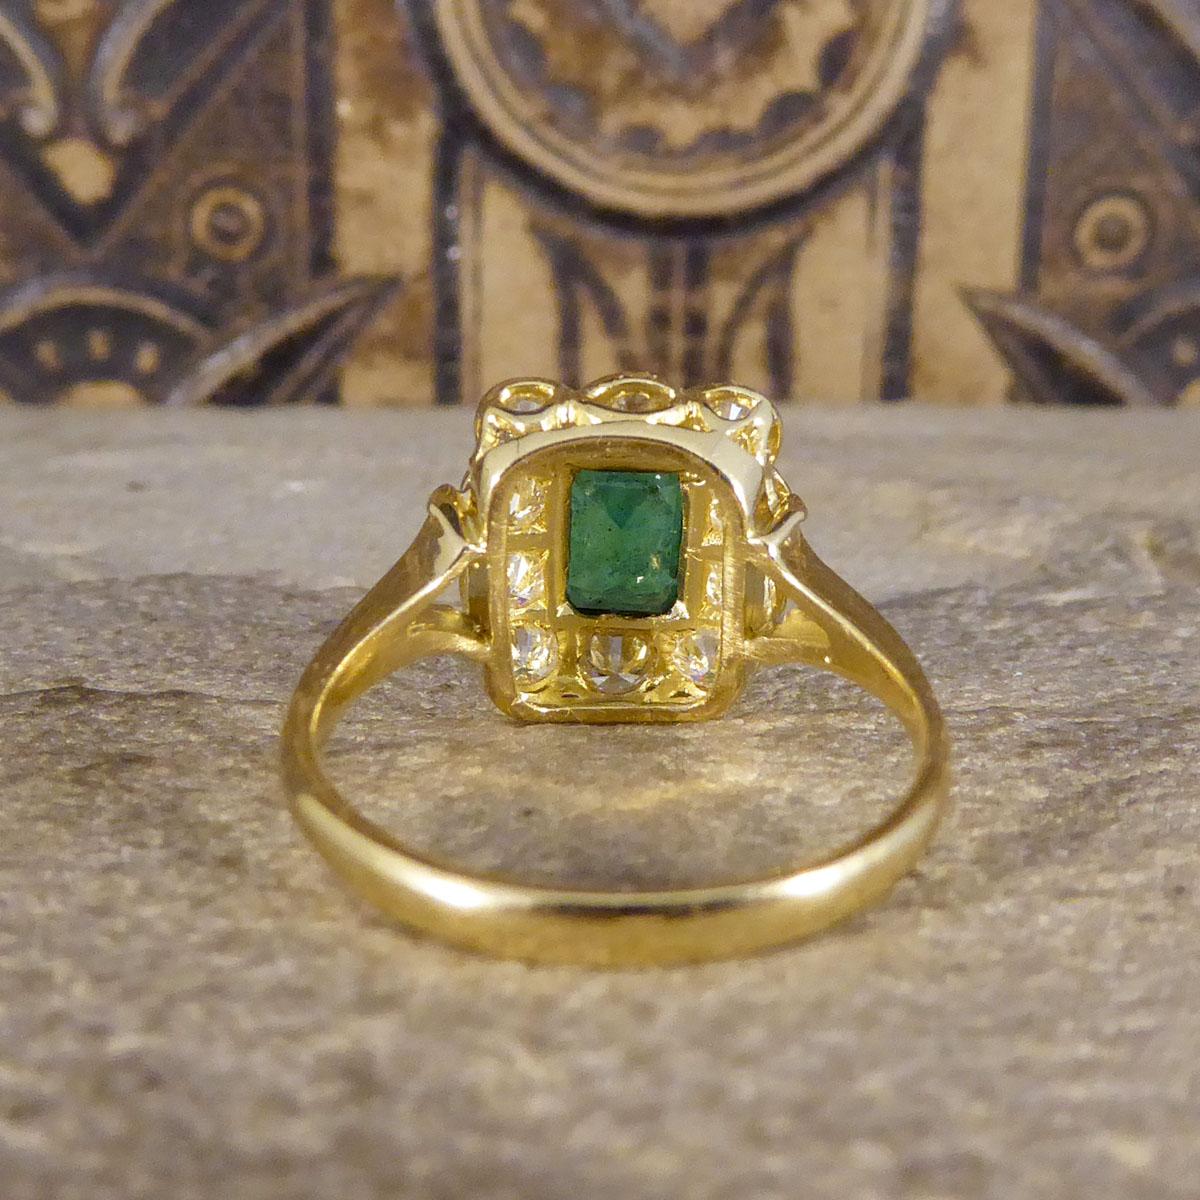 Contemporary Edwardian Style 0.90ct Emerald & Diamond Cluster Ring in 18ct Gold In Excellent Condition For Sale In Yorkshire, West Yorkshire